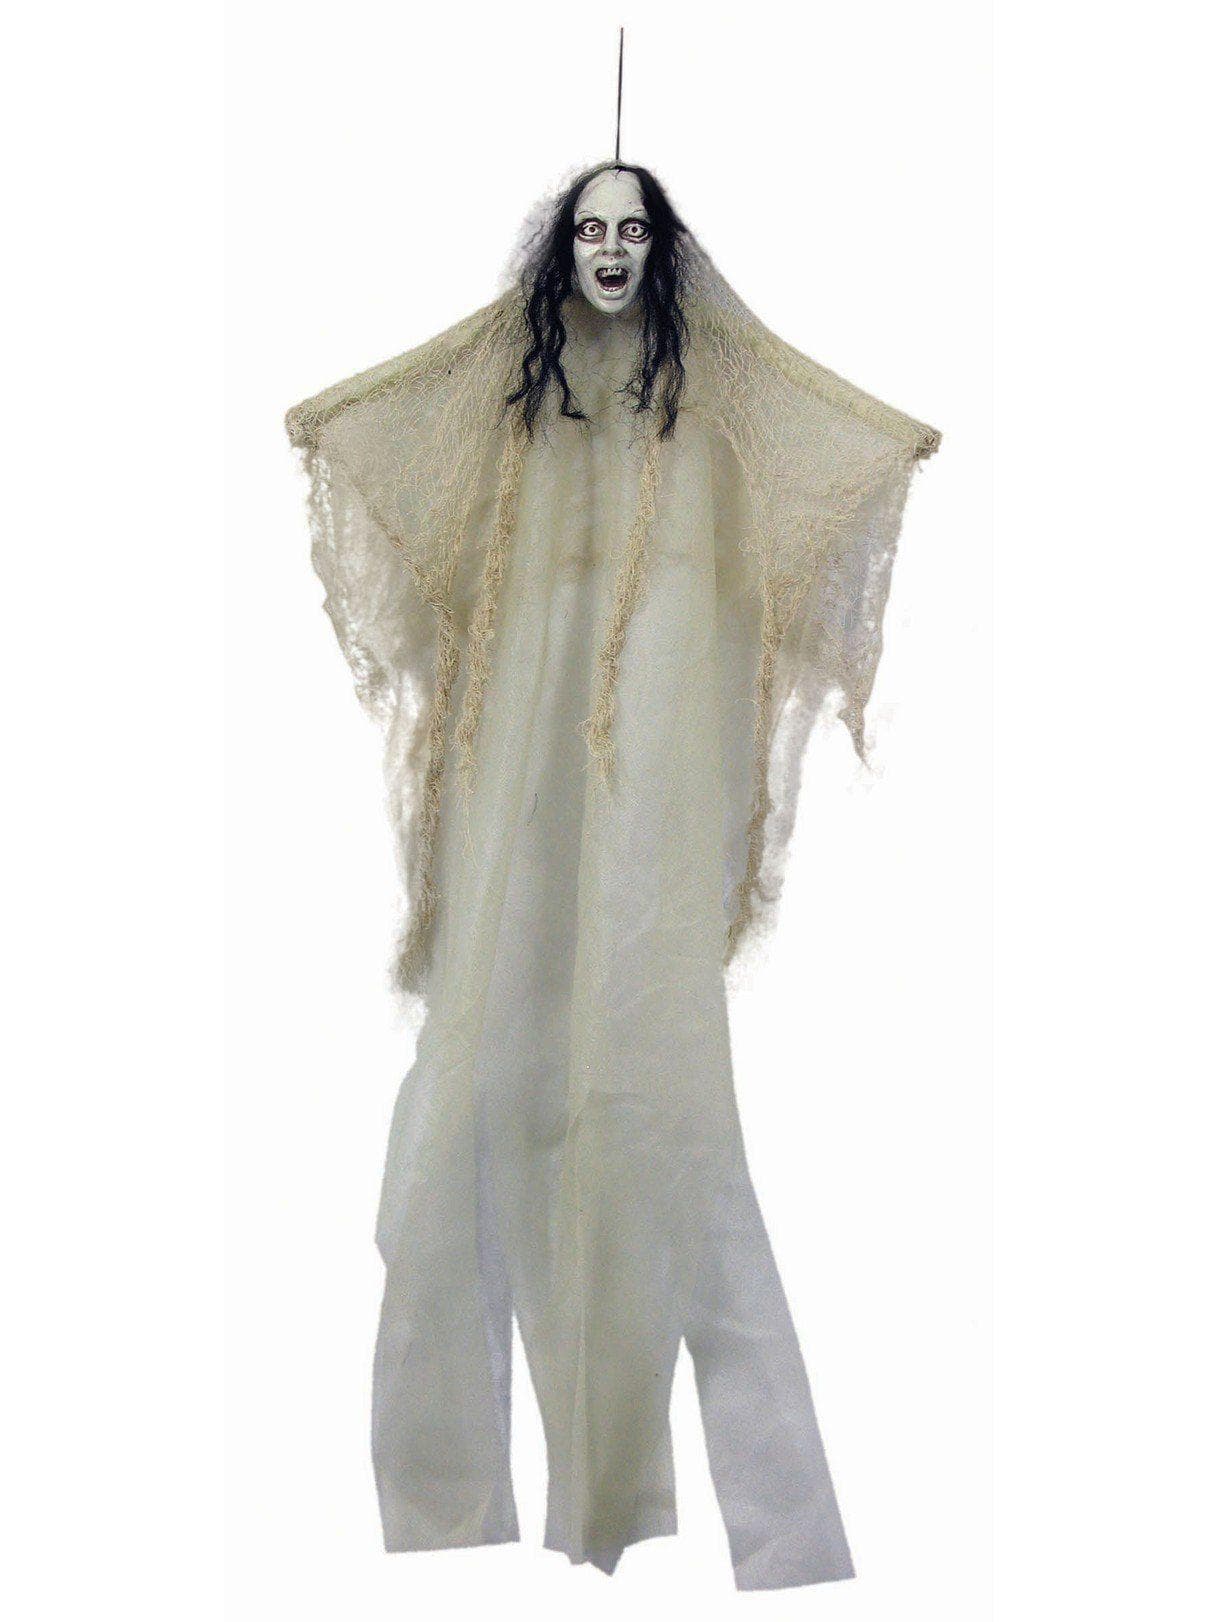 30-inch Zombie Woman Prop - costumes.com